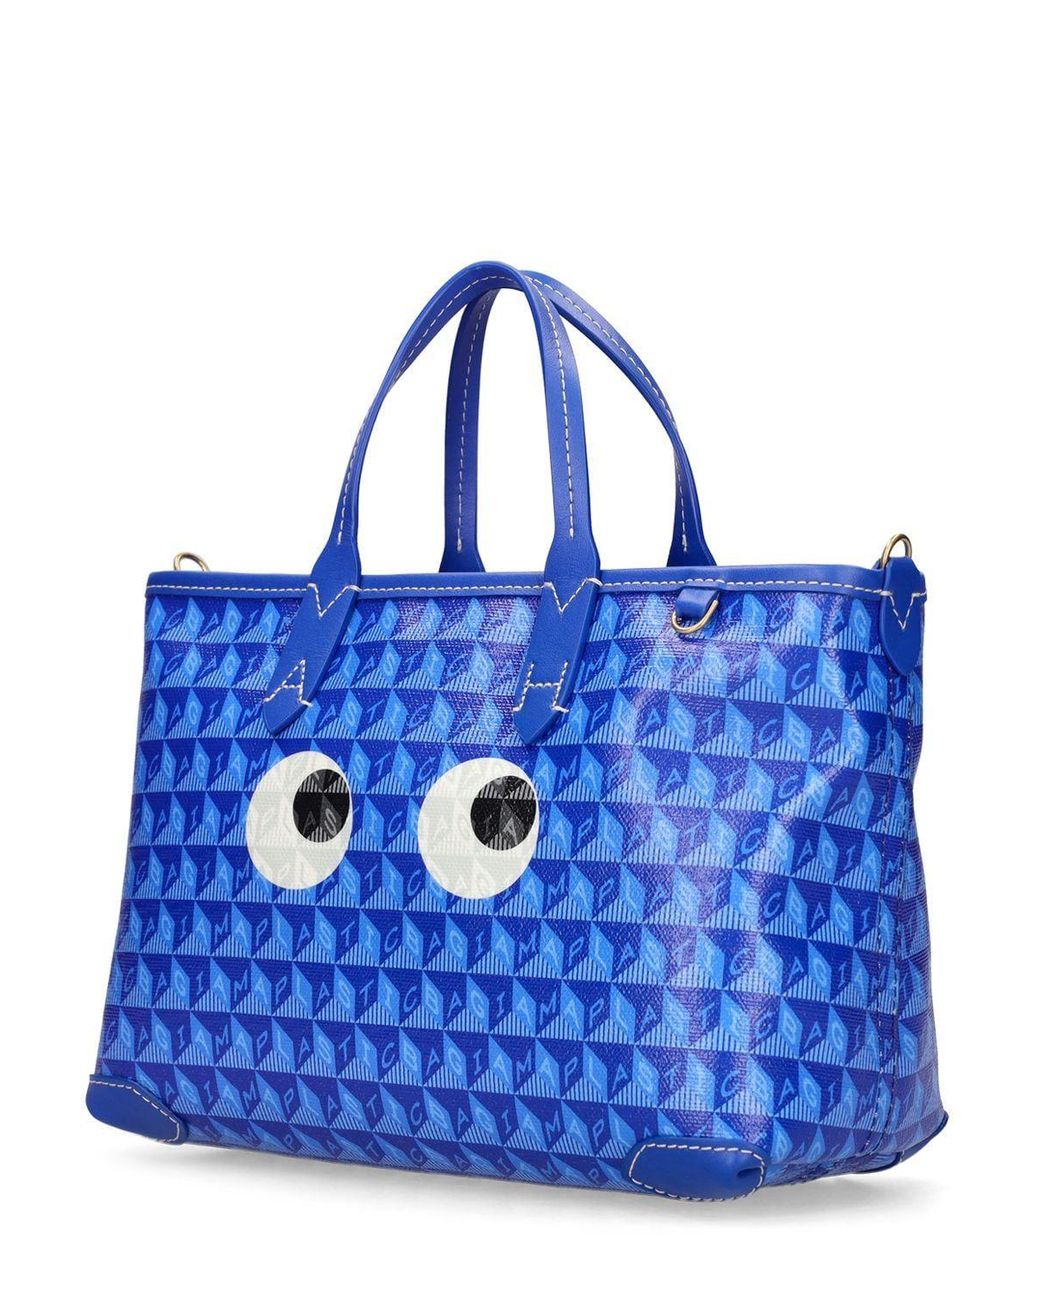 Anya Hindmarch Xs I Am A Plastic Bag Eyes Tote Bag in Blue | Lyst